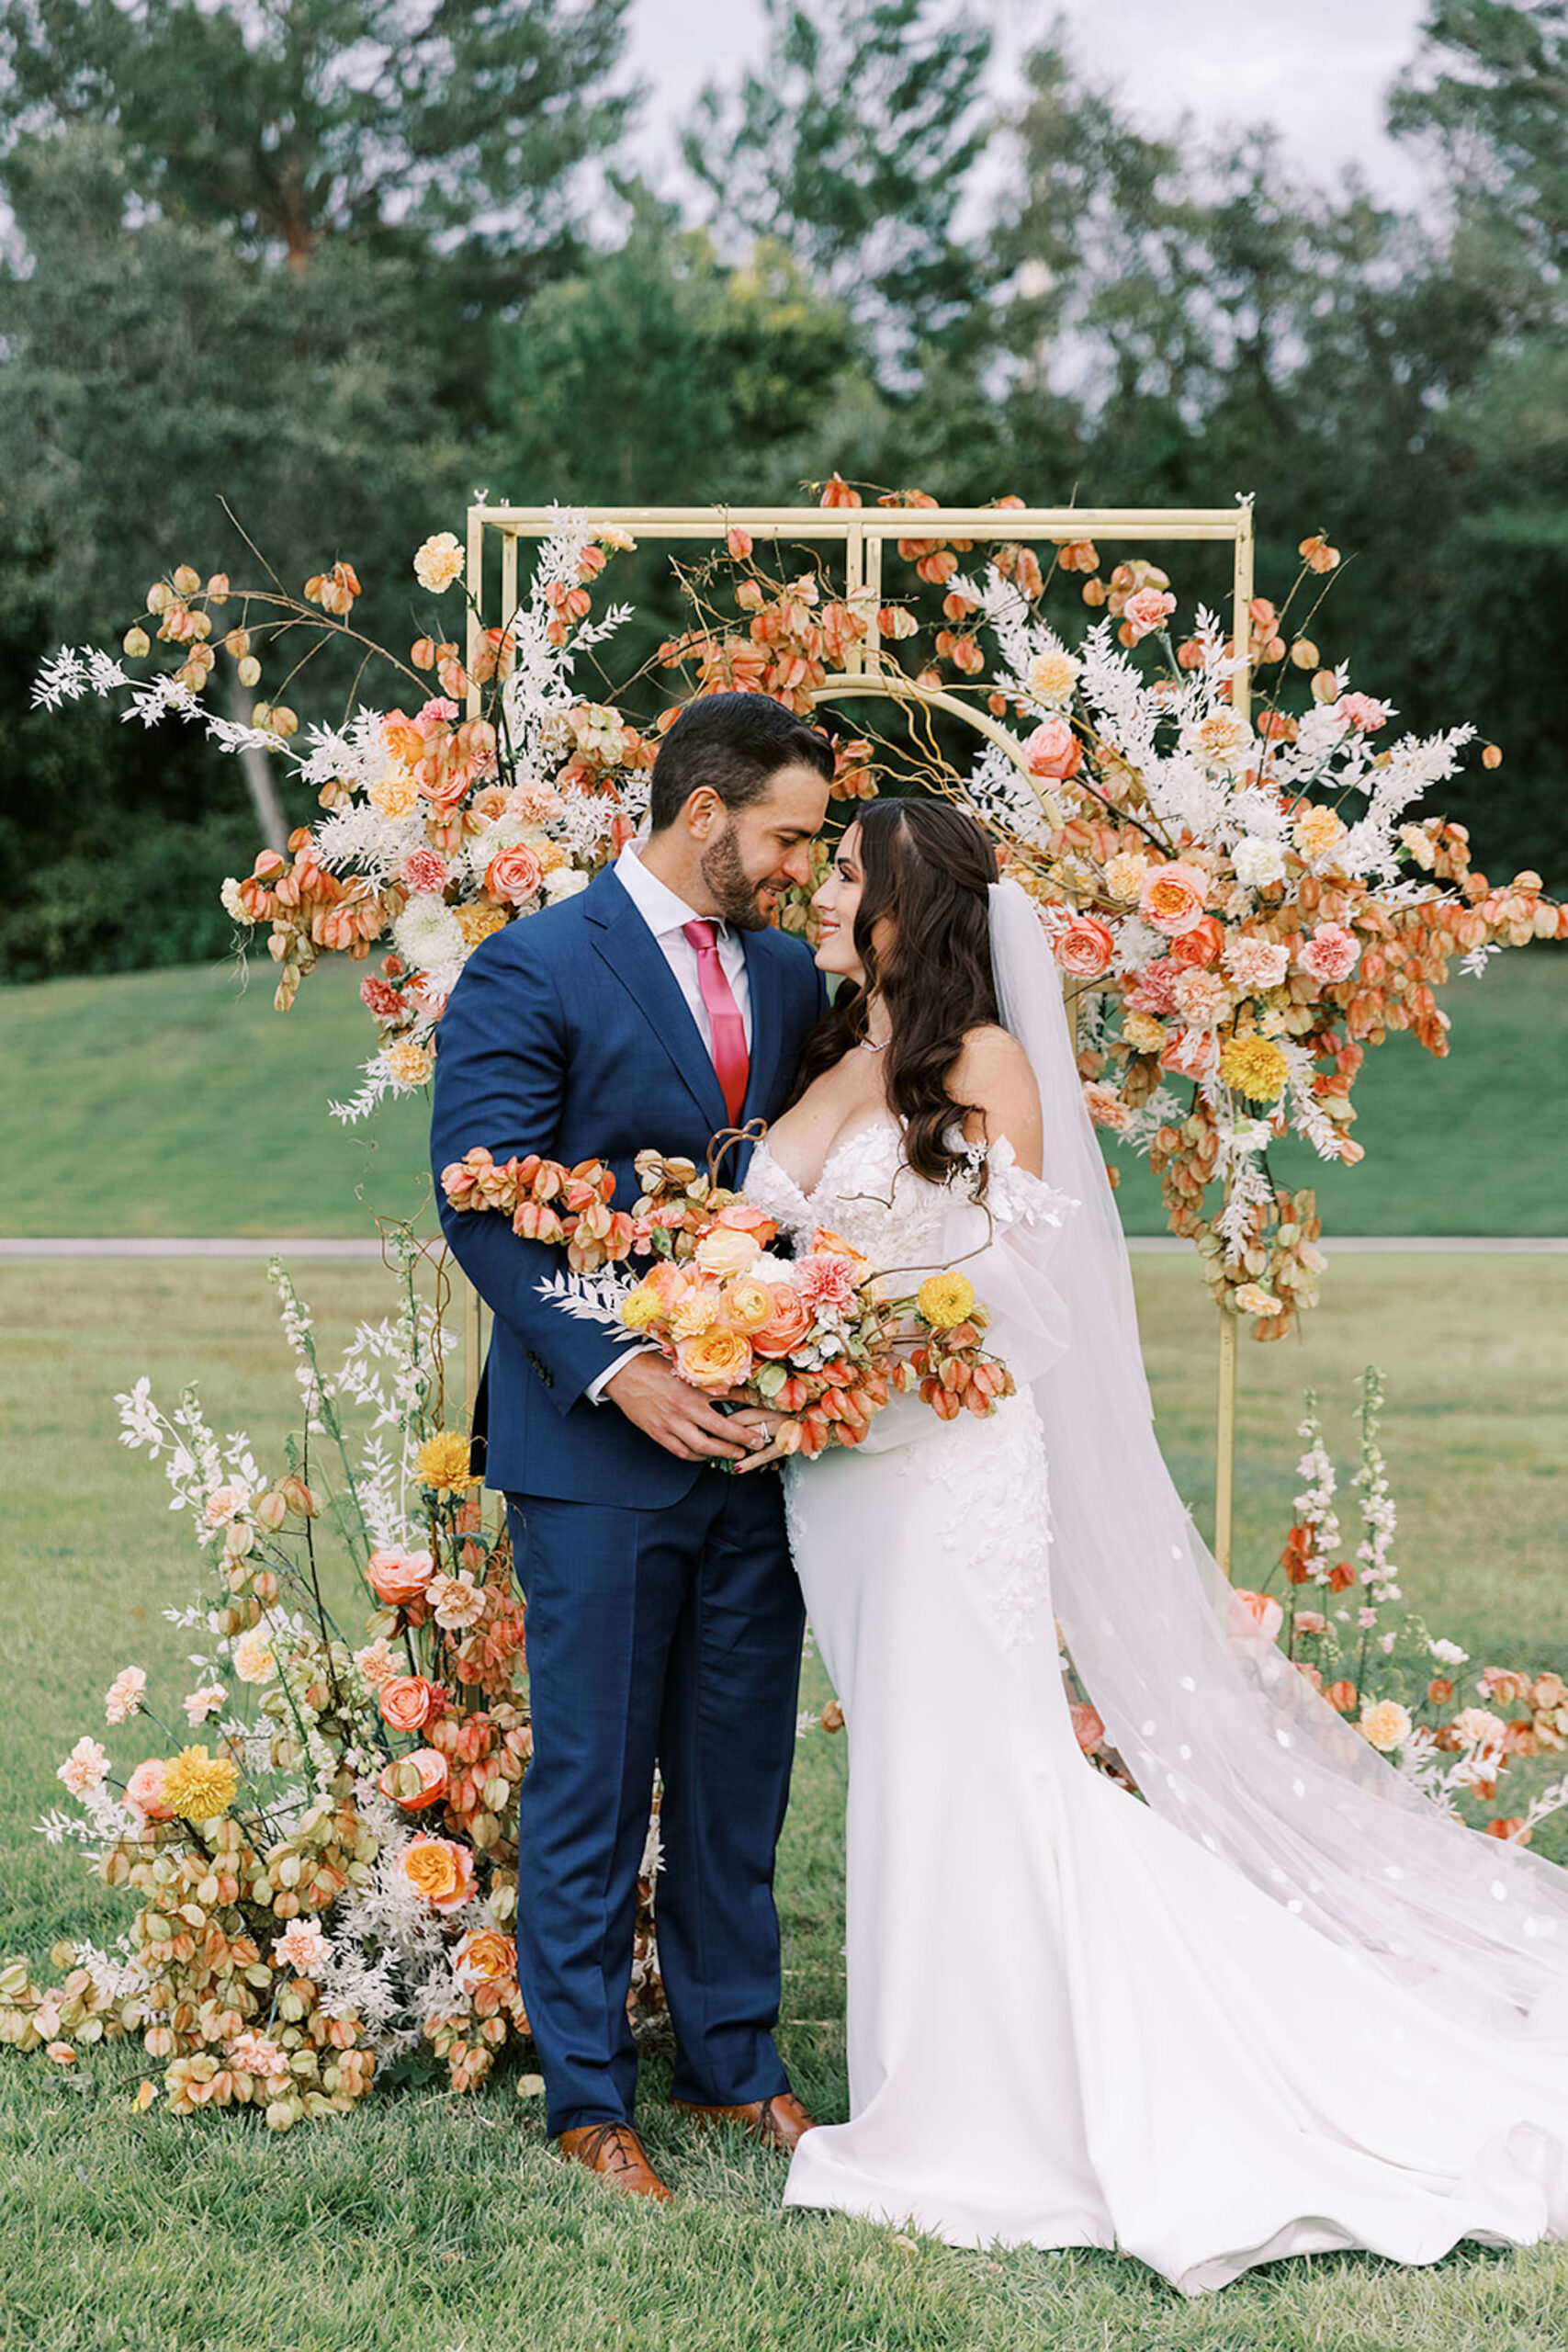 Gold Wedding Ceremony Arch with White, Pink, Peach, and Yellow Flower Arrangement Ideas | Spring Wedding Inspiration | Tampa Bay Planner MDP Events | Venue Whitehurst Gallery